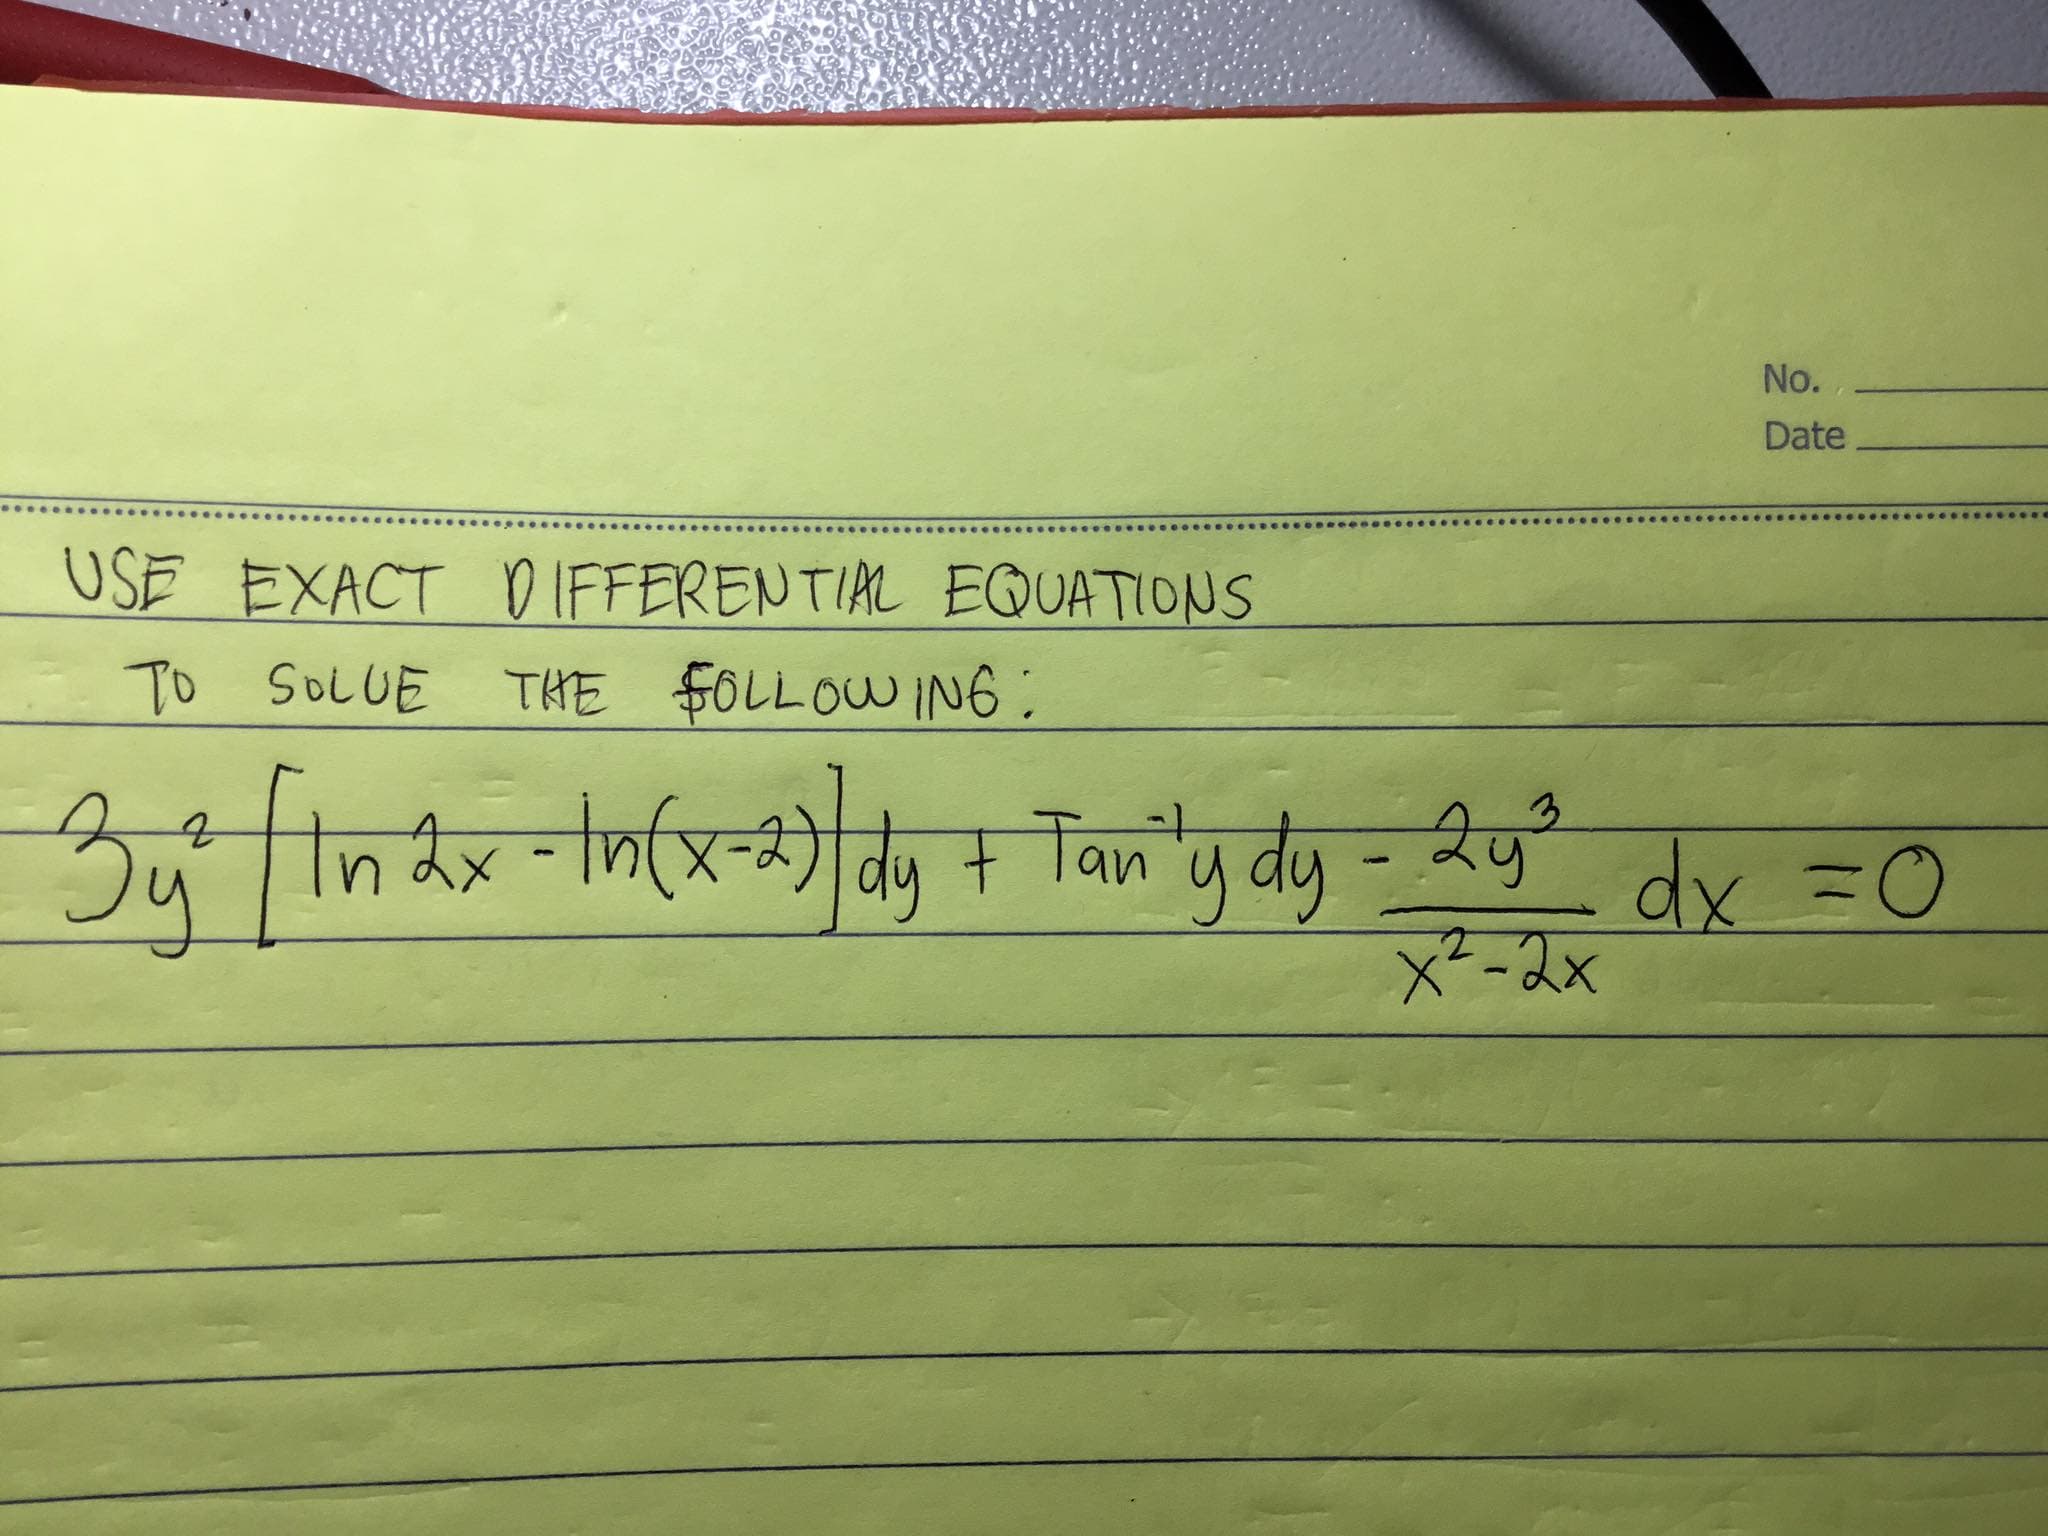 USE EXACT DIFFERENTIAL EQUATIONS
To SOLUE THE $OLLOWING:
In dx-tn(x=2)
'पर्क - डेण बर =0
y dy
dx 3D0
x²-2x
